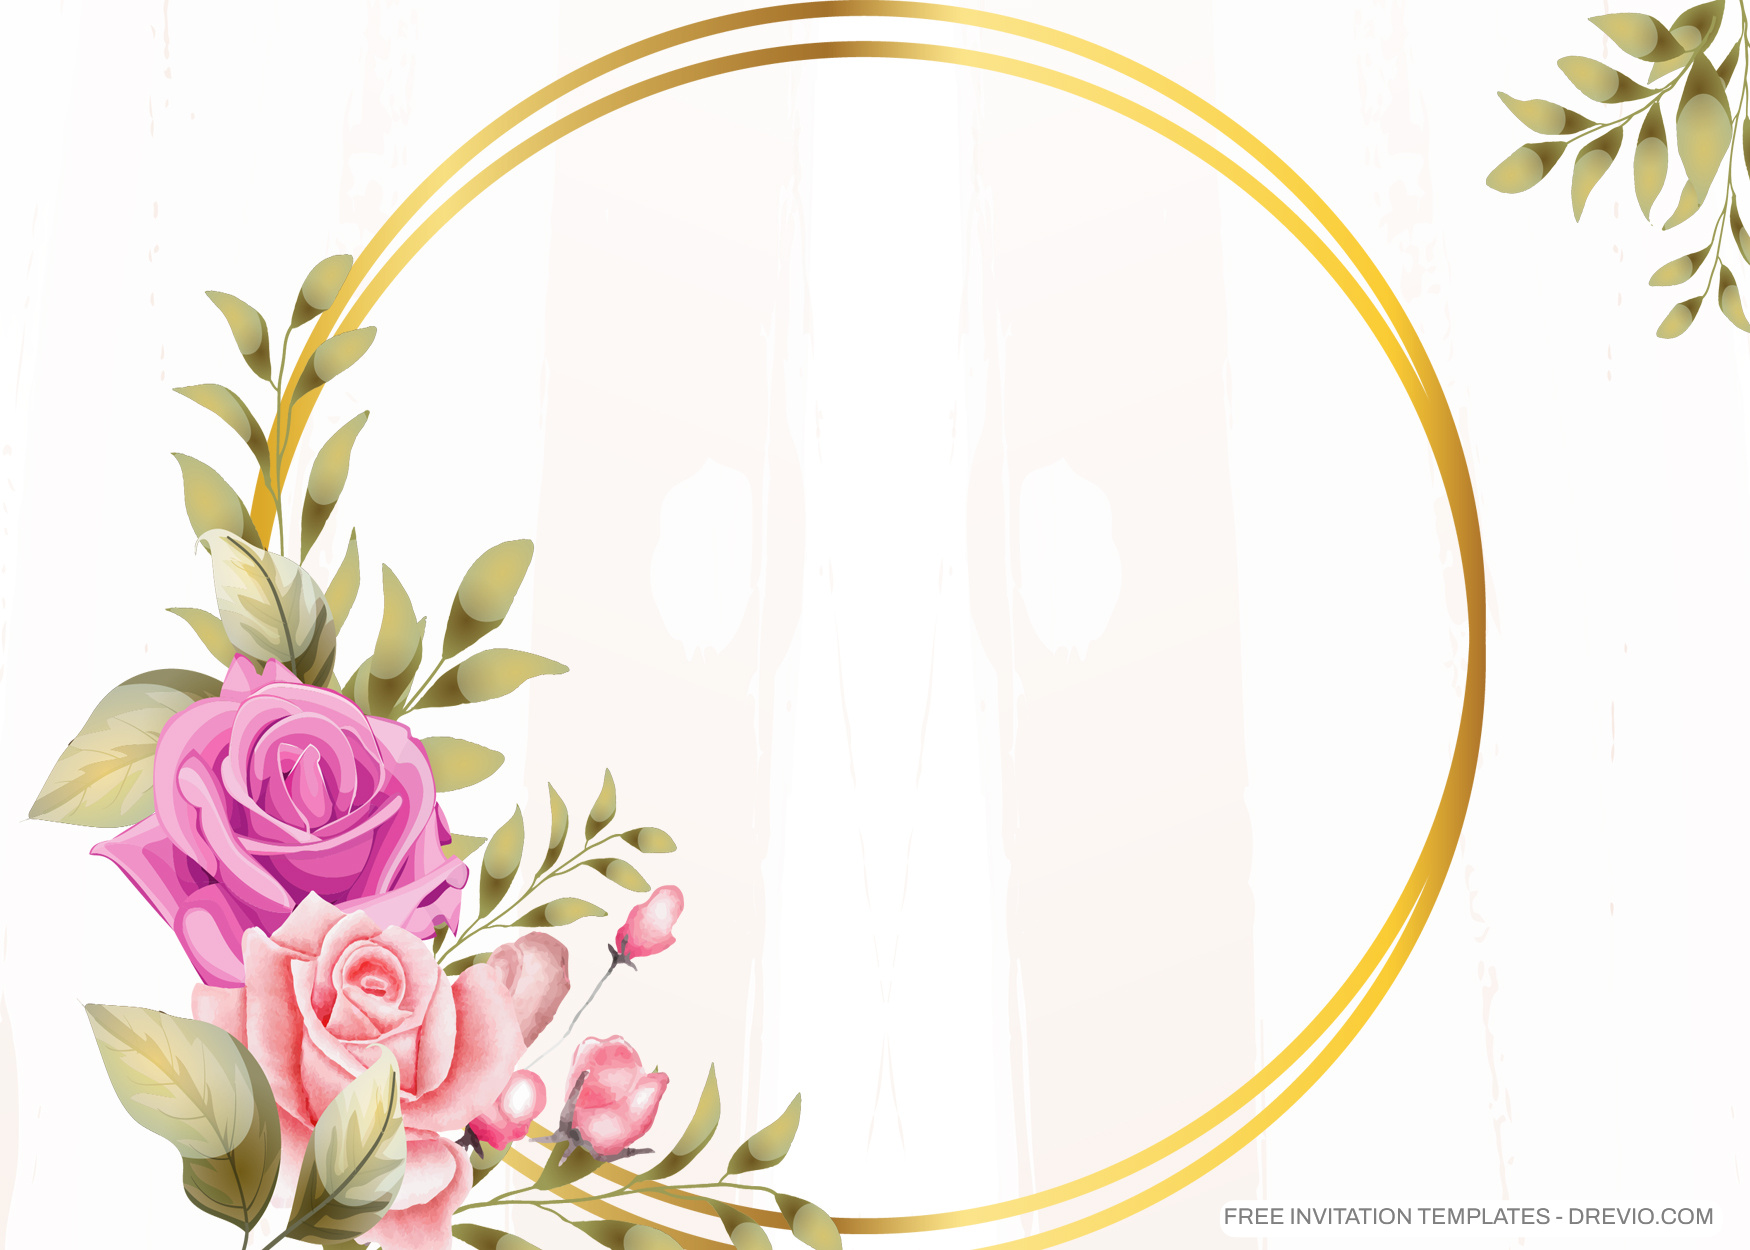 8+ Golden Circle Roses Floral Invitation Template